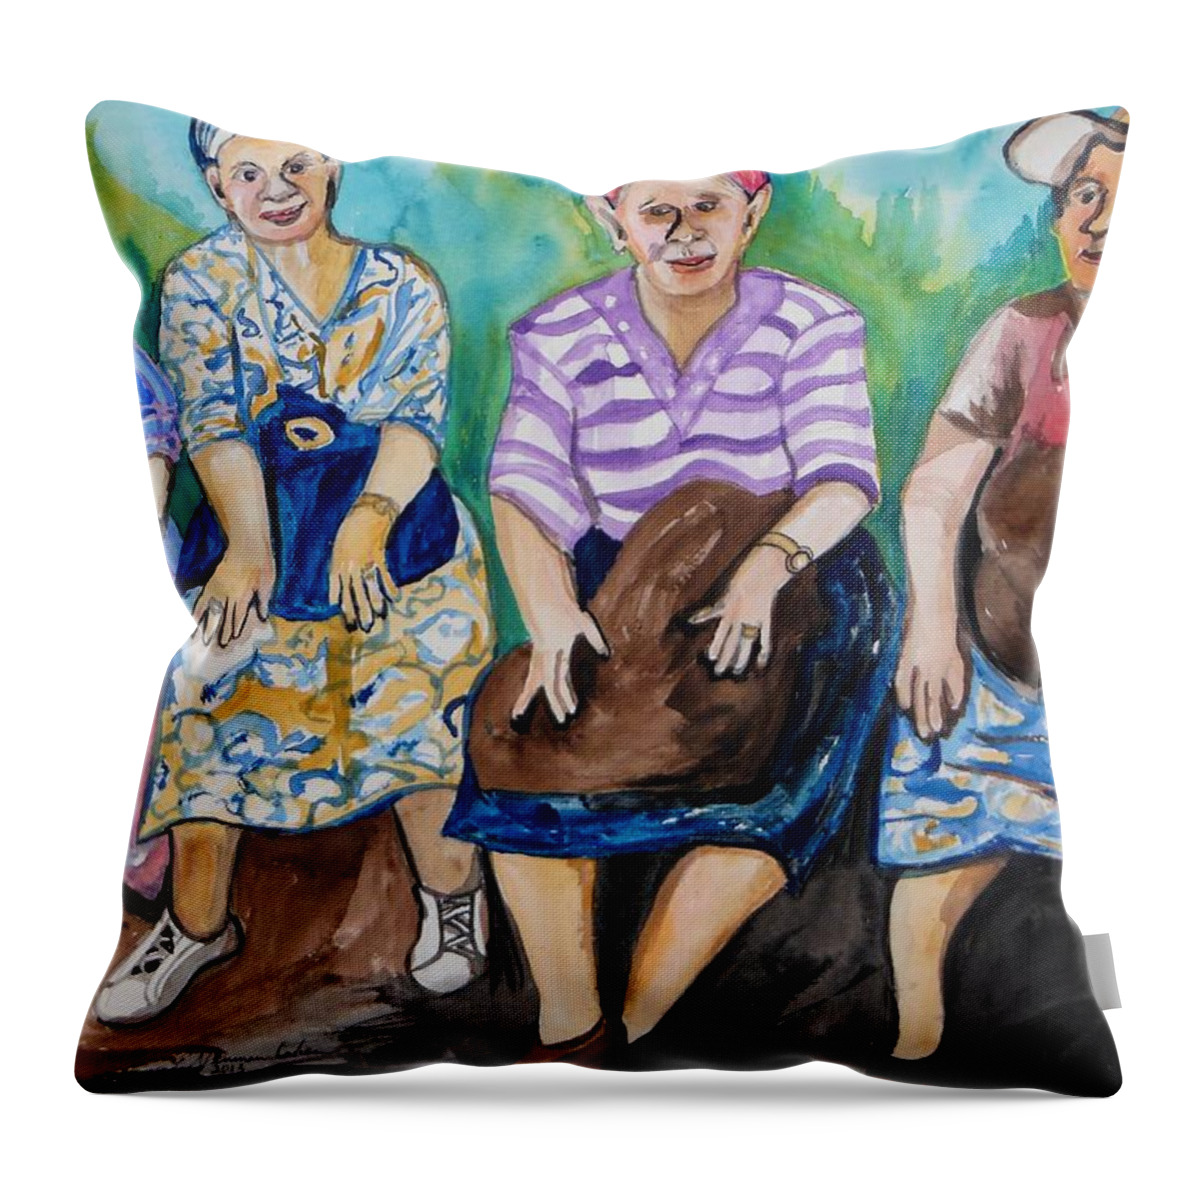 Girls Day Out Throw Pillow featuring the painting Girls Day Out by Esther Newman-Cohen